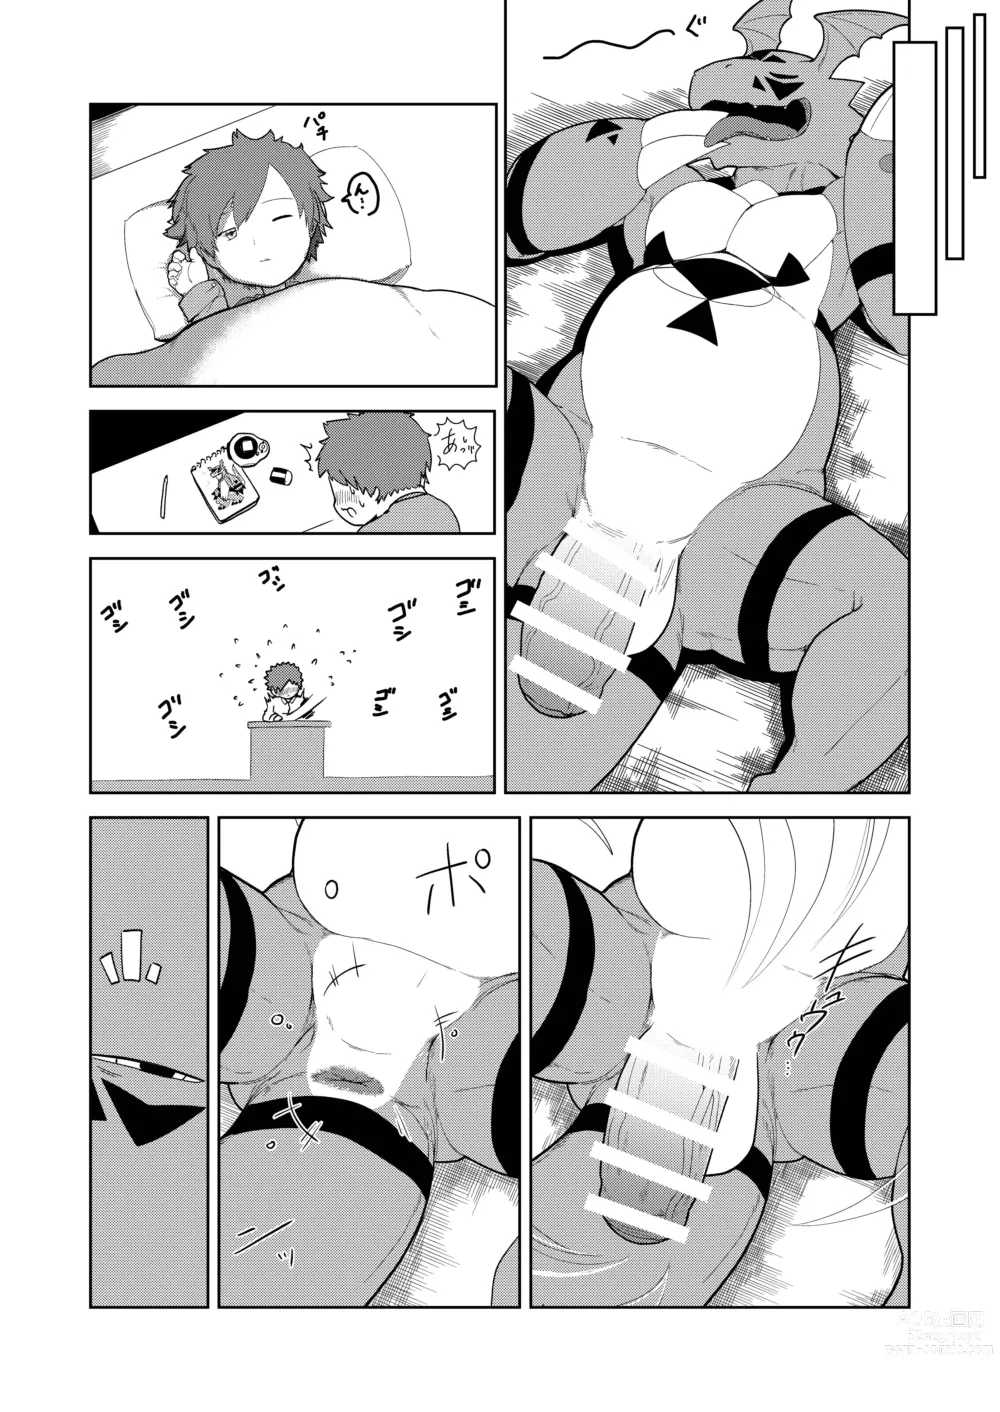 Page 44 of doujinshi Guilty Monster